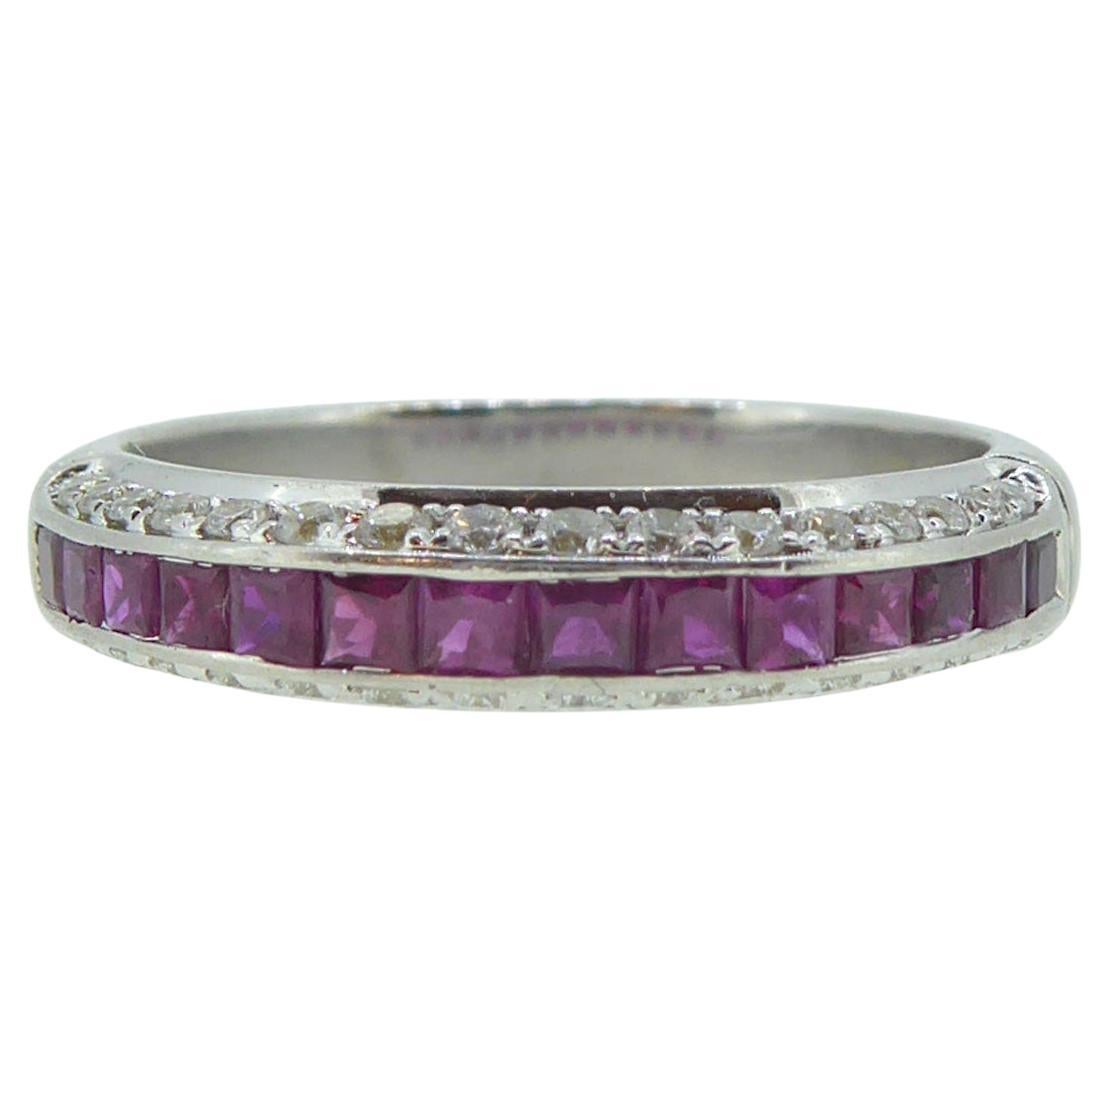 Pre-Owned 0.42ct Ruby & Diamond Eternity Ring, Channel Settings, 18ct White Gold